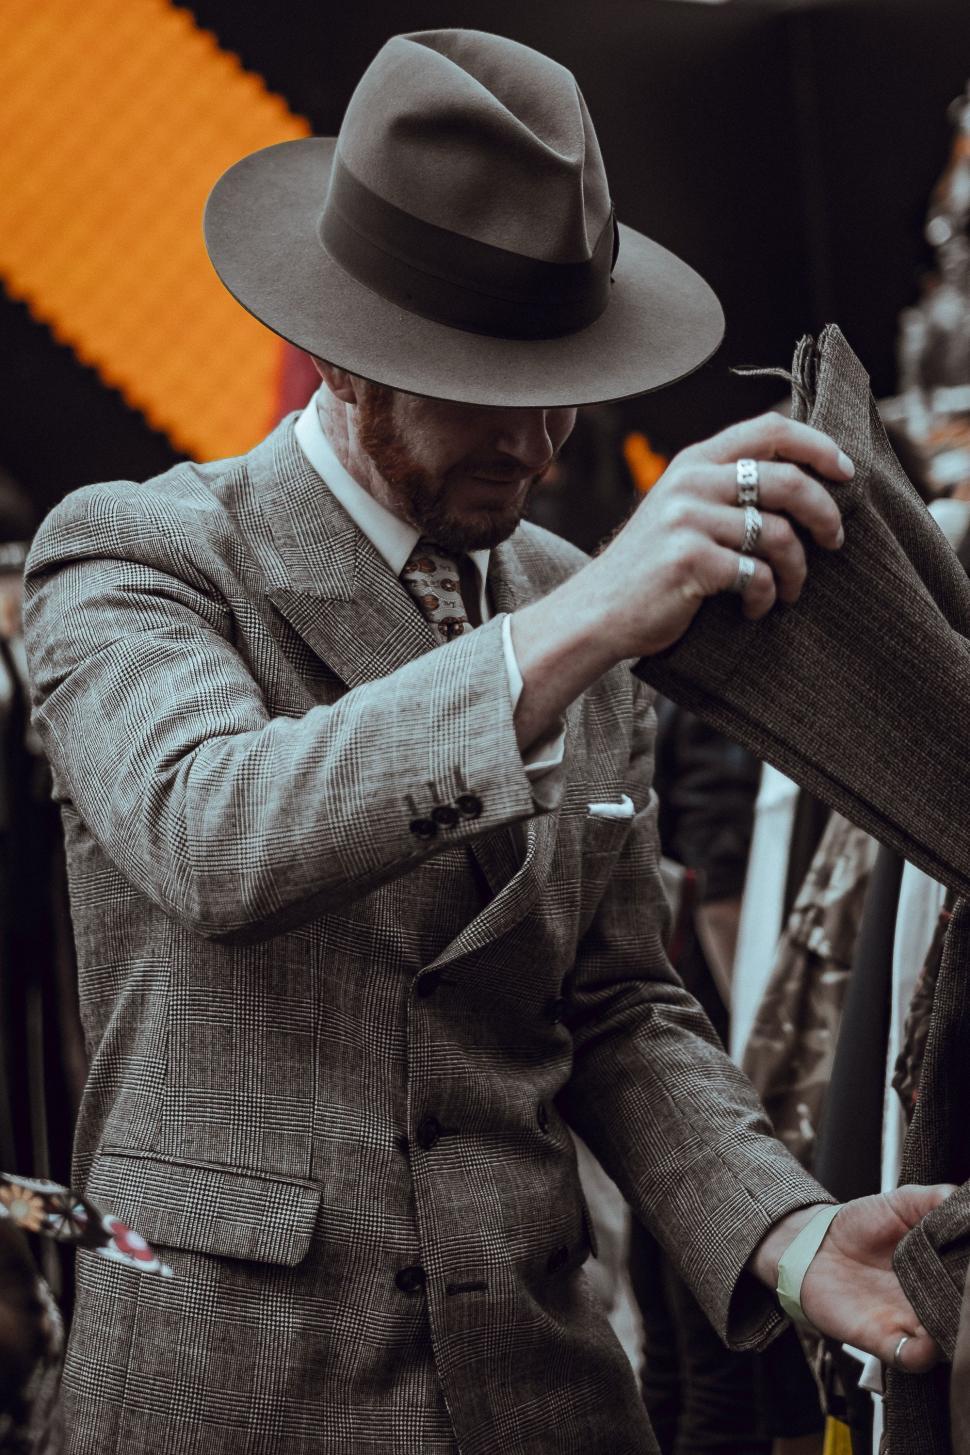 Free Image of Man in Suit and Hat Tying a Tie 